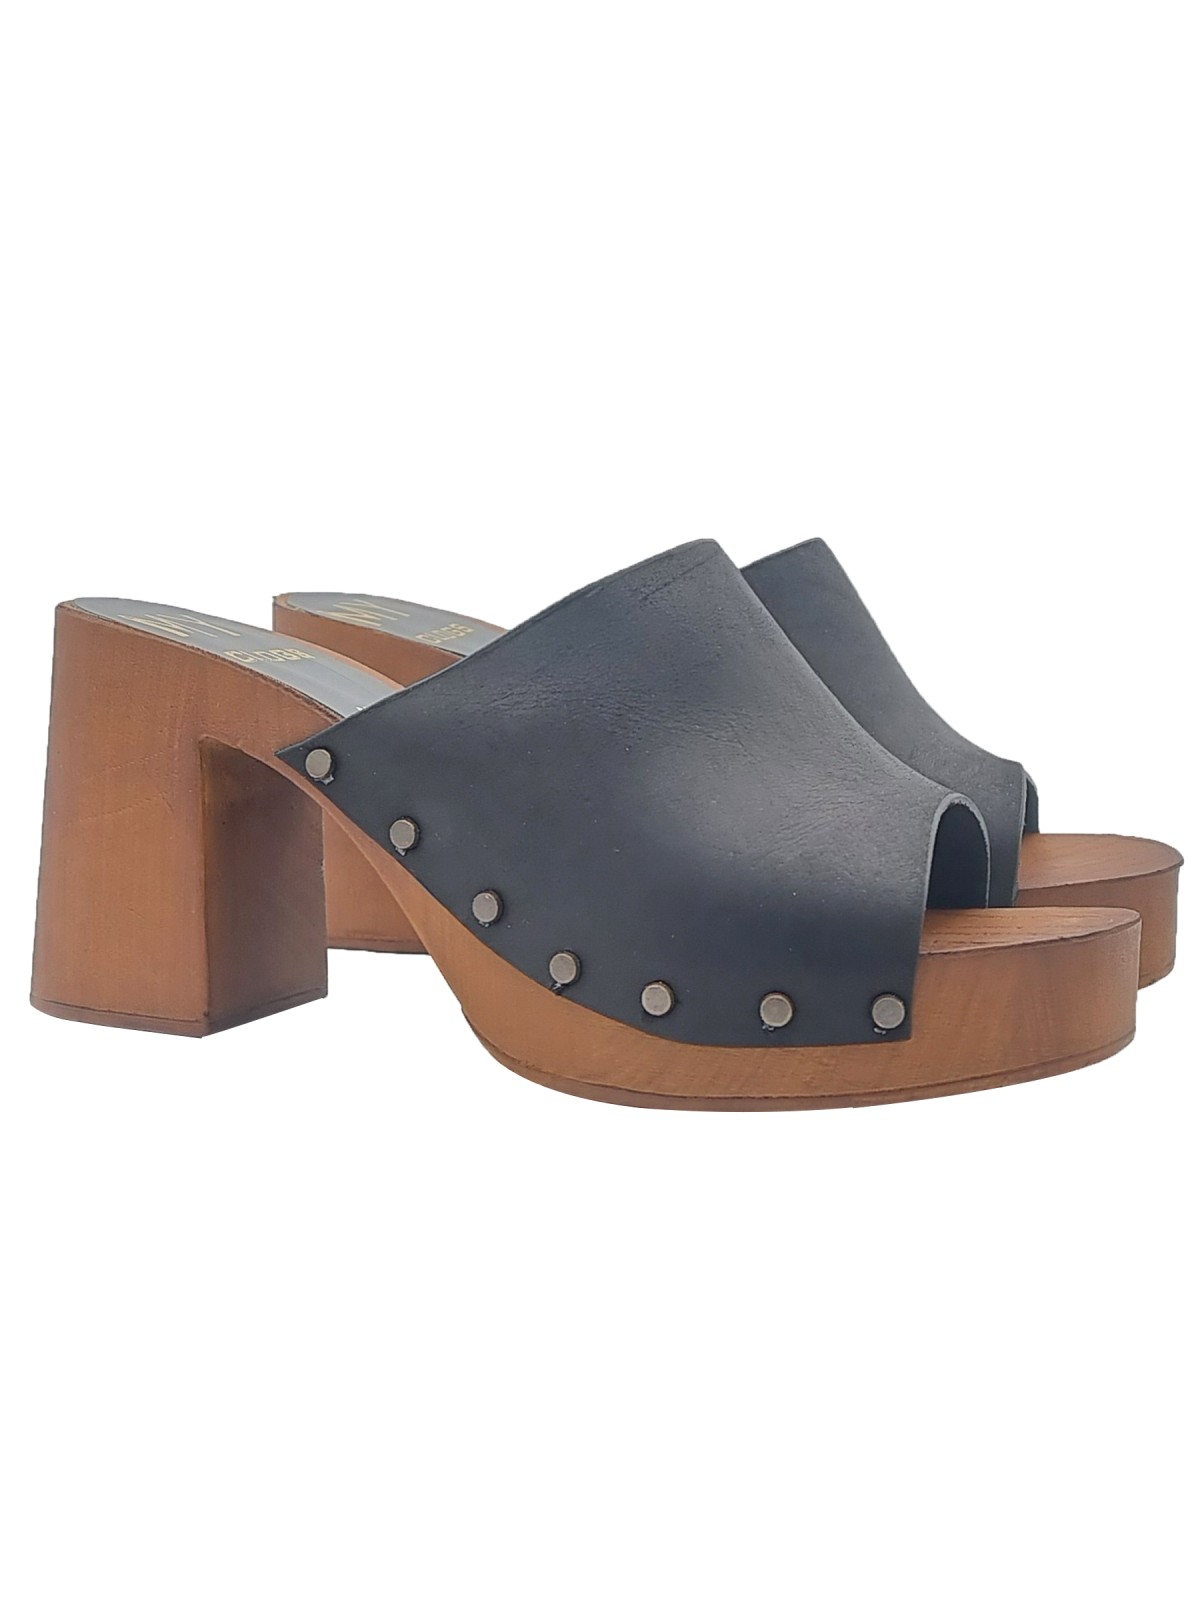 WOMEN'S MULES IN BLACK LEATHER WITH 8,5 CM HEEL